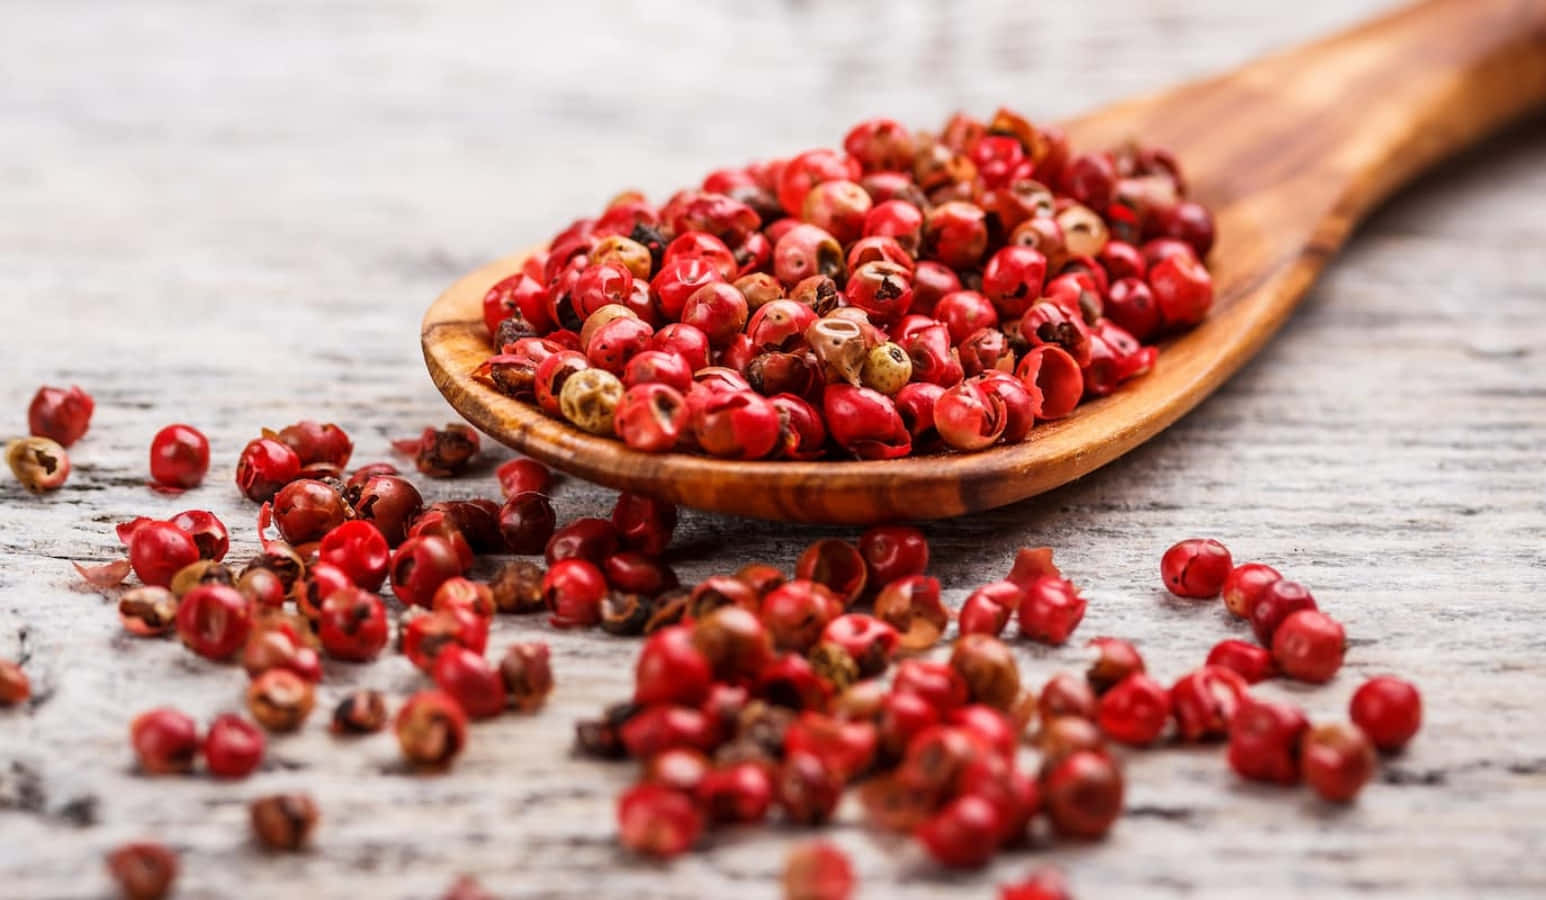 A close-up view of pink peppercorns on a wooden surface Wallpaper